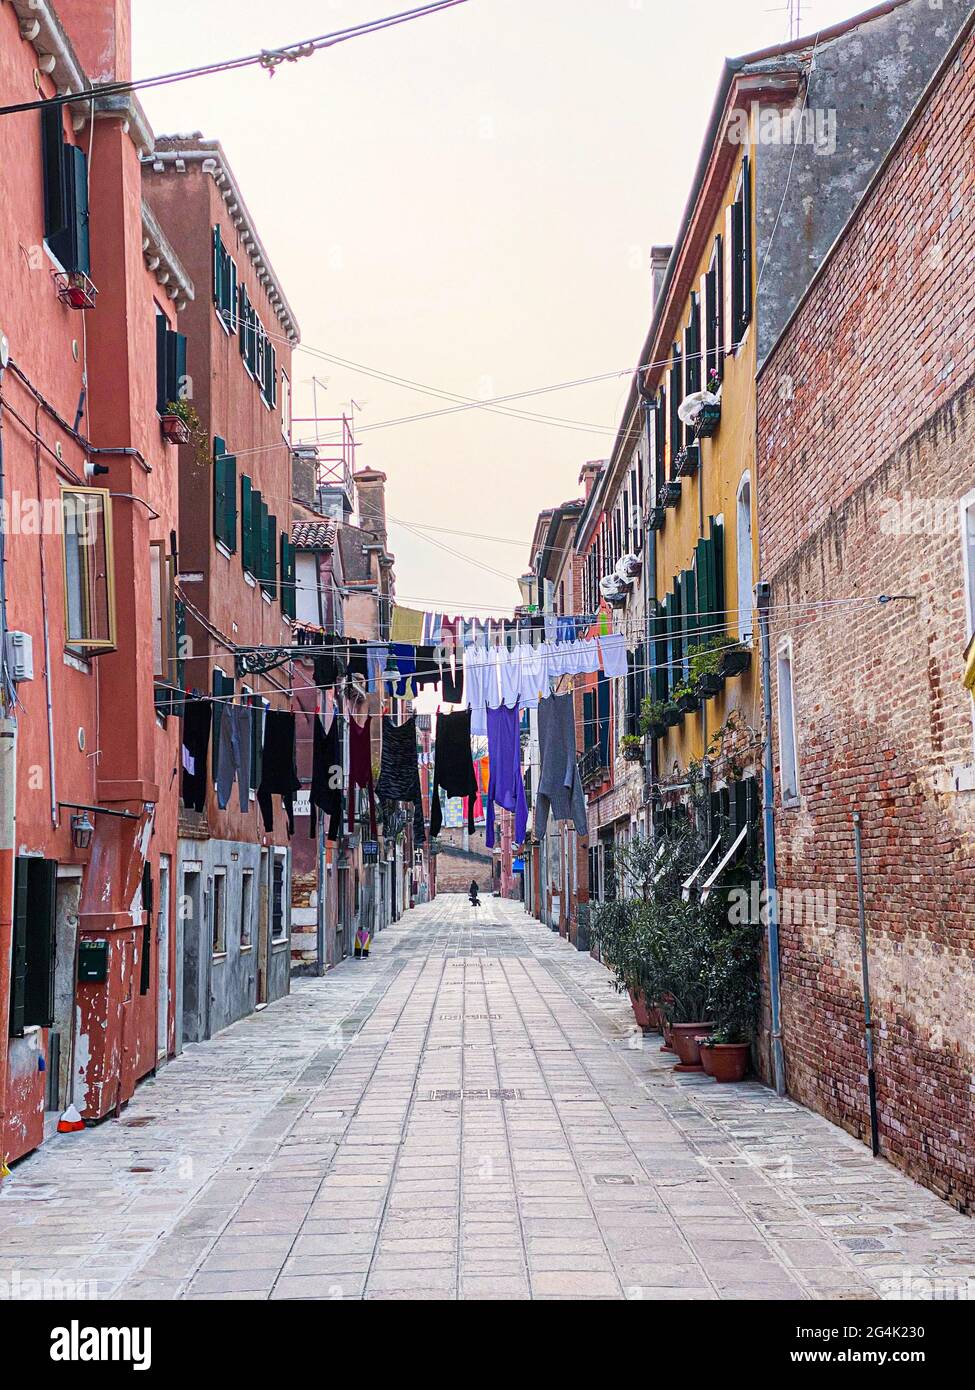 Colorful dead end street in Venice with lots of laundry hanging out to dry in lines stretched between the houses Stock Photo